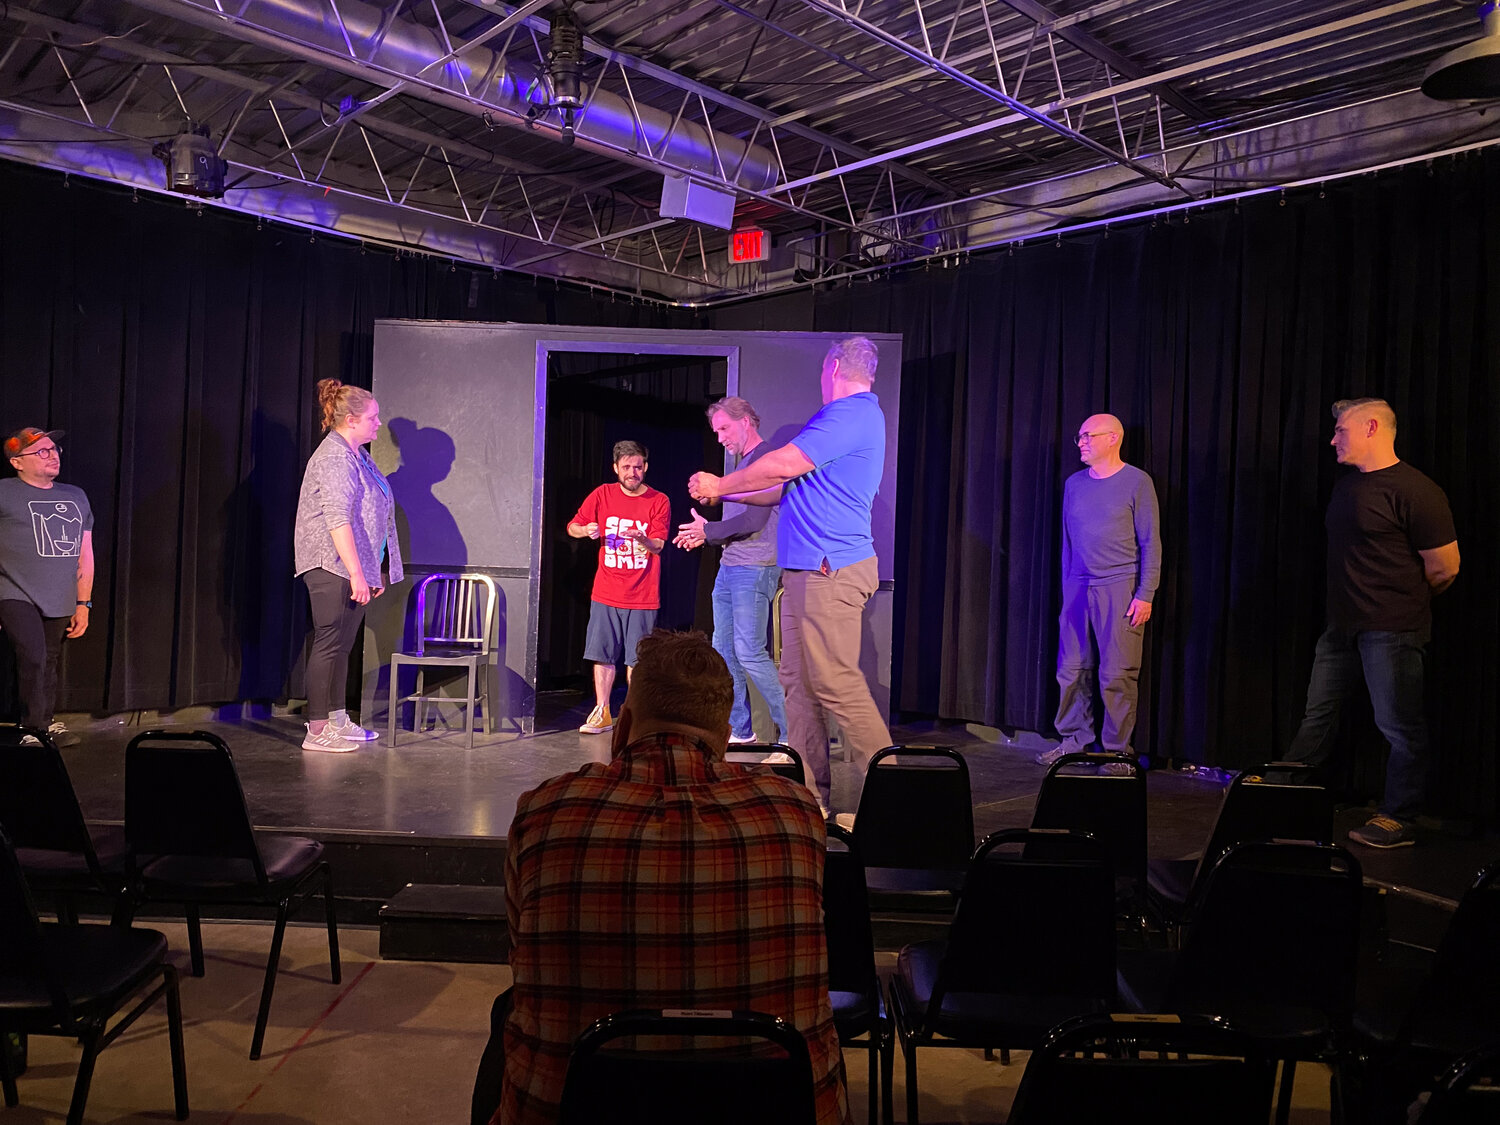 Comedians improvise during Dino Jam on Thursday, May 4, 2023. Dino Jam on Thursday nights at HUGE IMPROV is led by a team of hosts who rotate: Matt Axelson, Julietta Benson (left), John Gebretatose, Eric Heiberg, Mahmoud Hakima, and Seniz Lennes. It is one of many weekly and special events at the southwest Minneapolis theater.